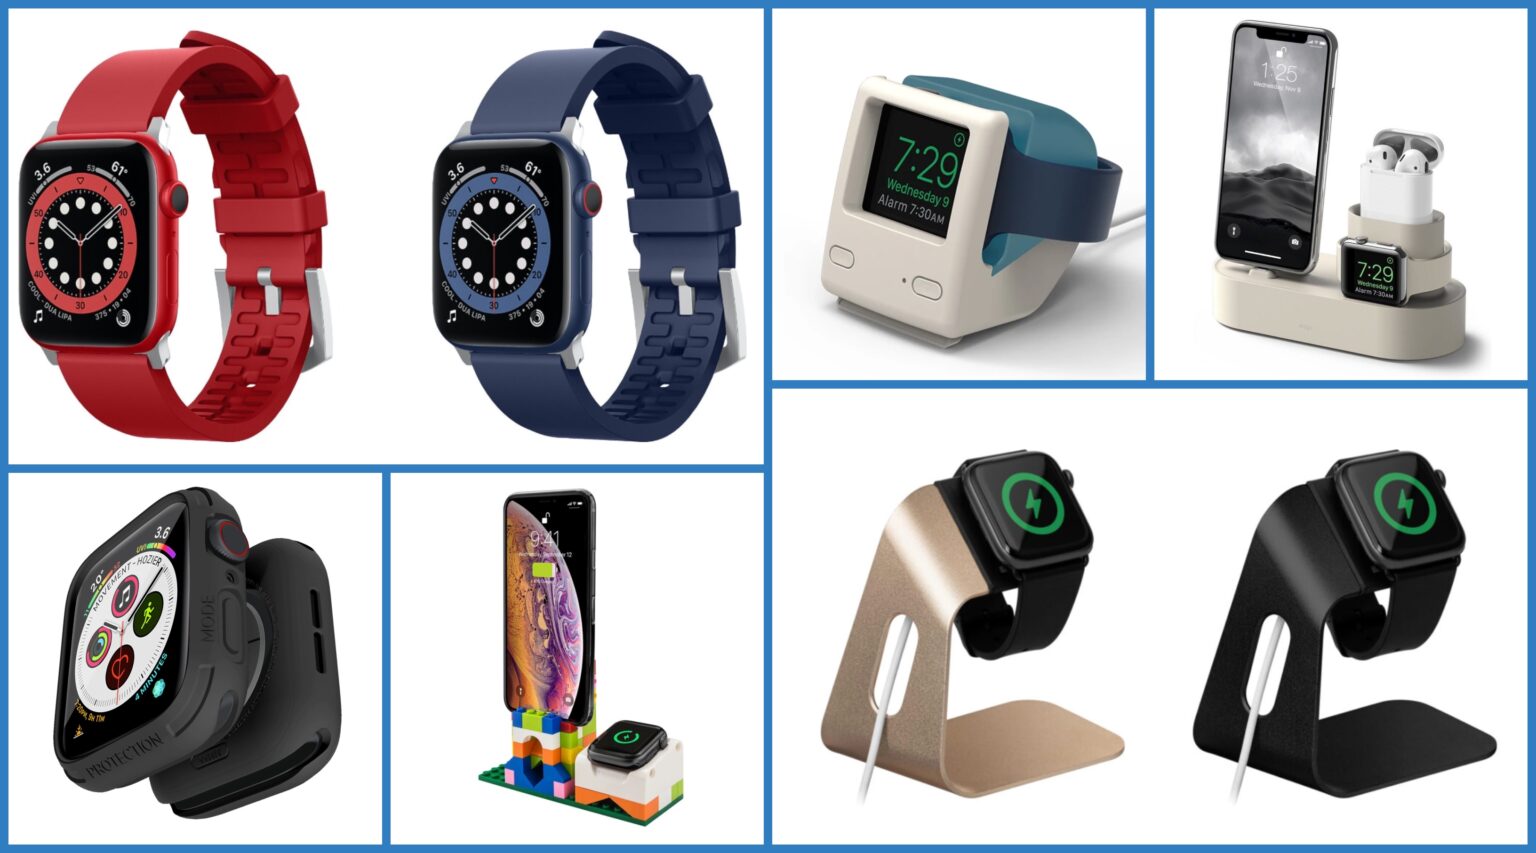 Apple Watch accessories at low prices